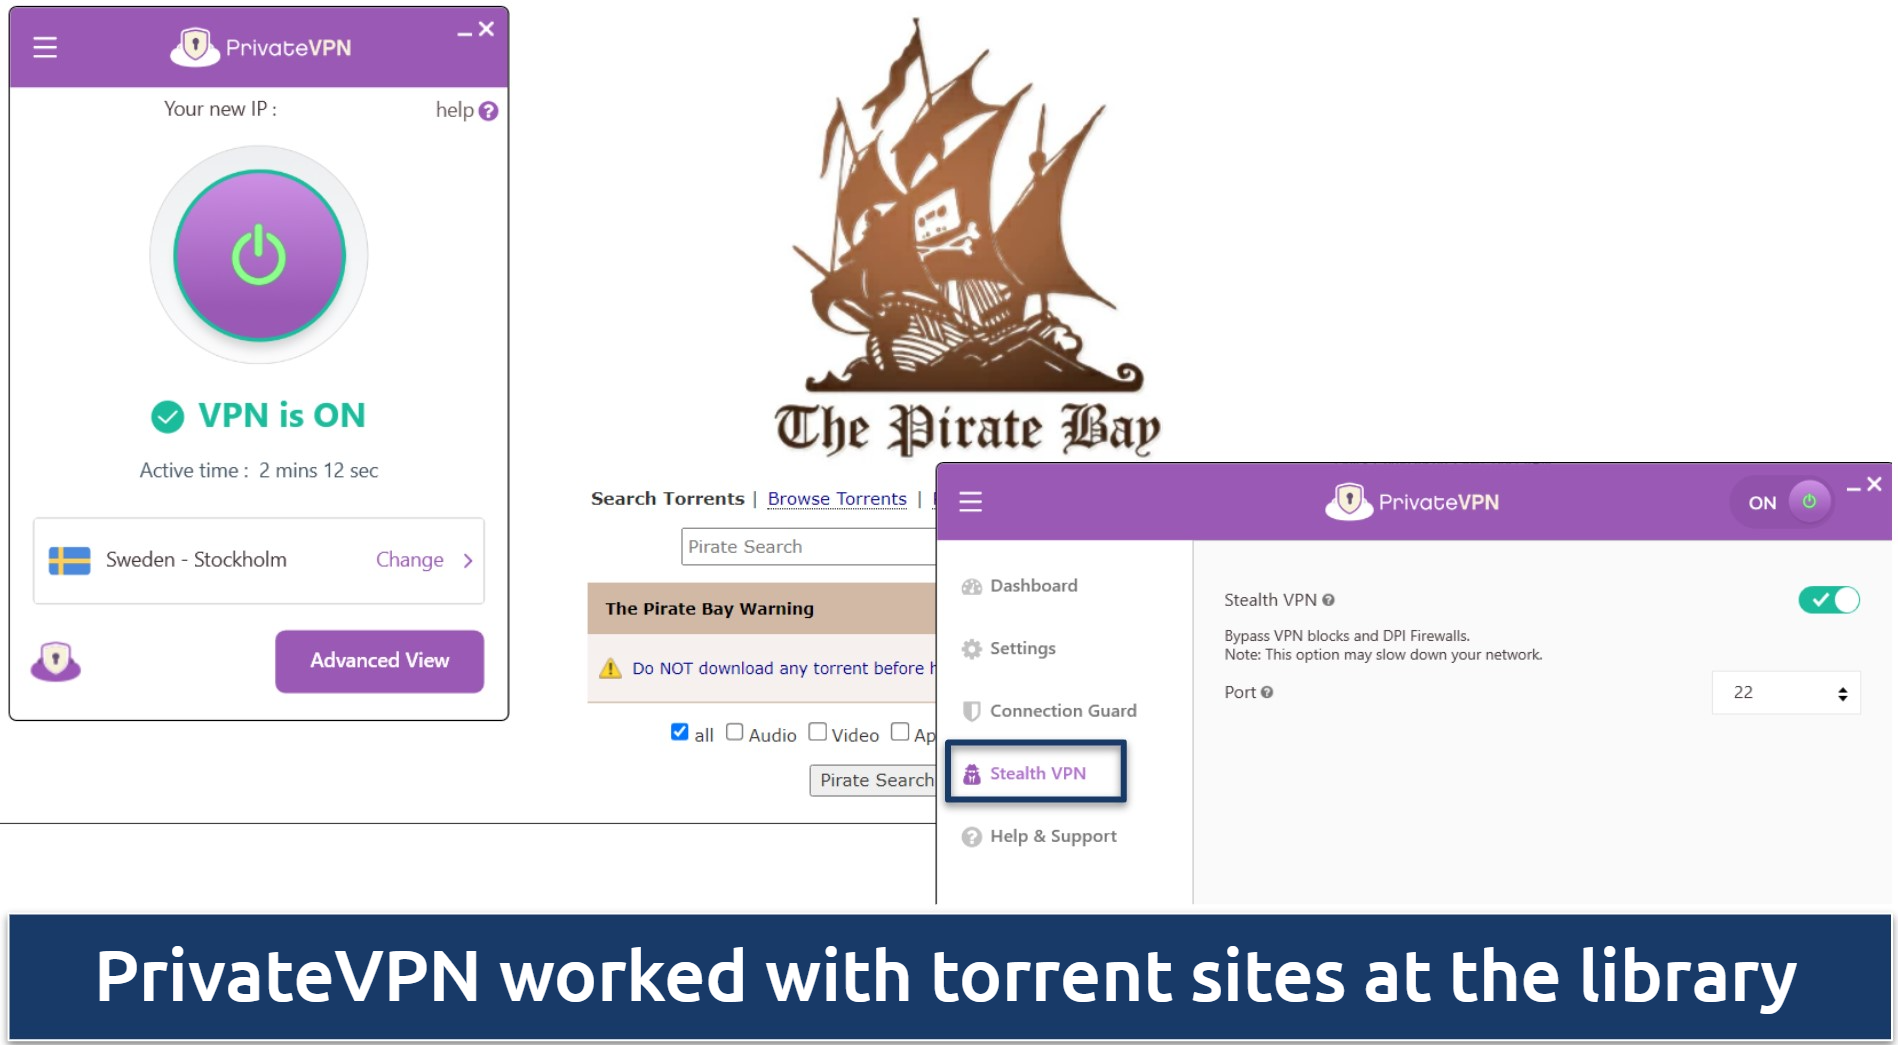 Visiting The Pirate Bay while connected to PrivateVPN with Stealth VPN activated